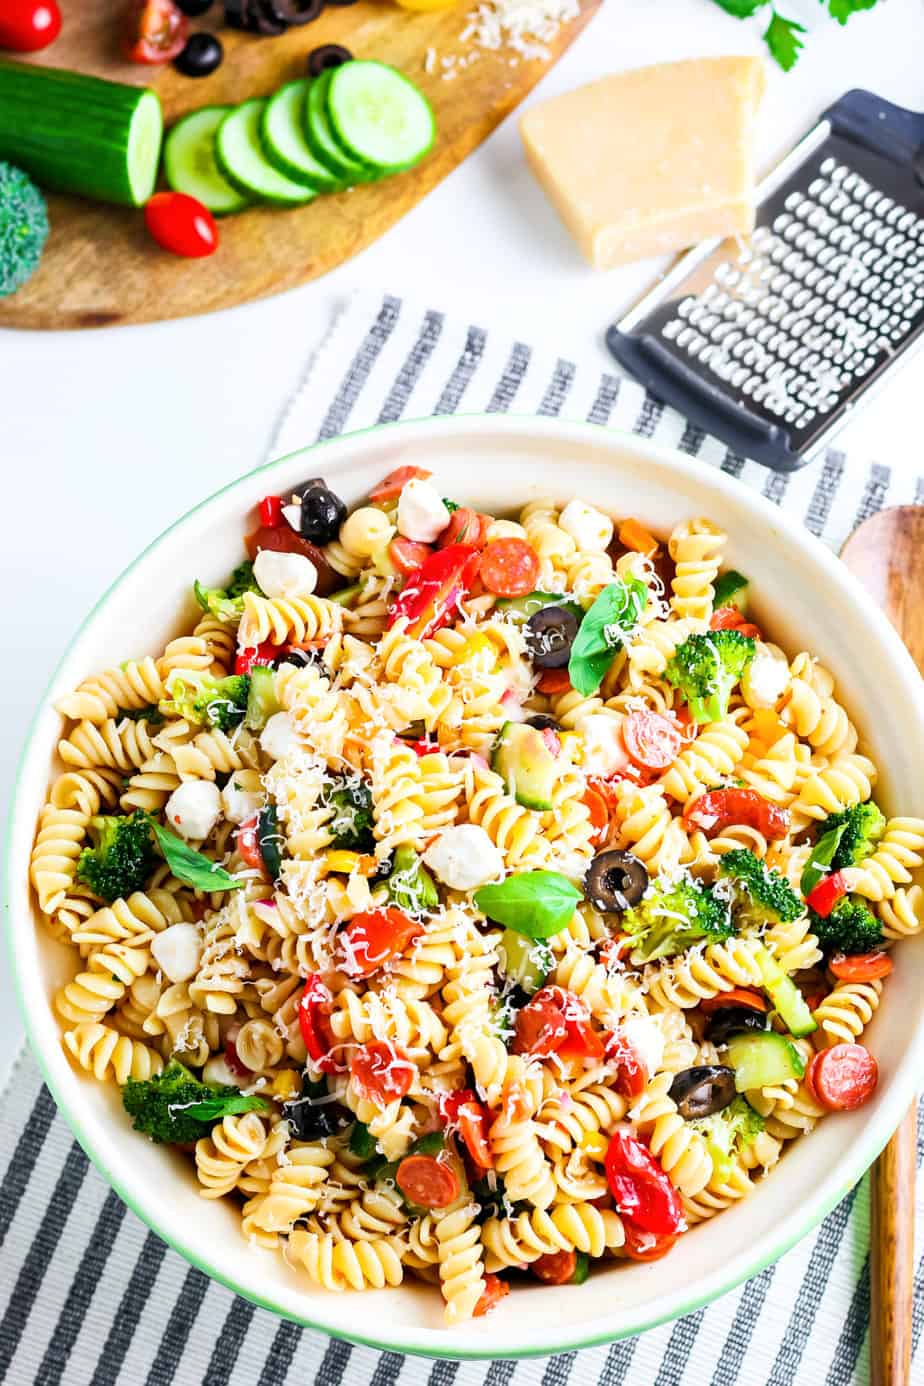 Italian pasta salad in a large serving bowl with a cutting board with vegetables and parmesan cheese and a grater near the bowl.